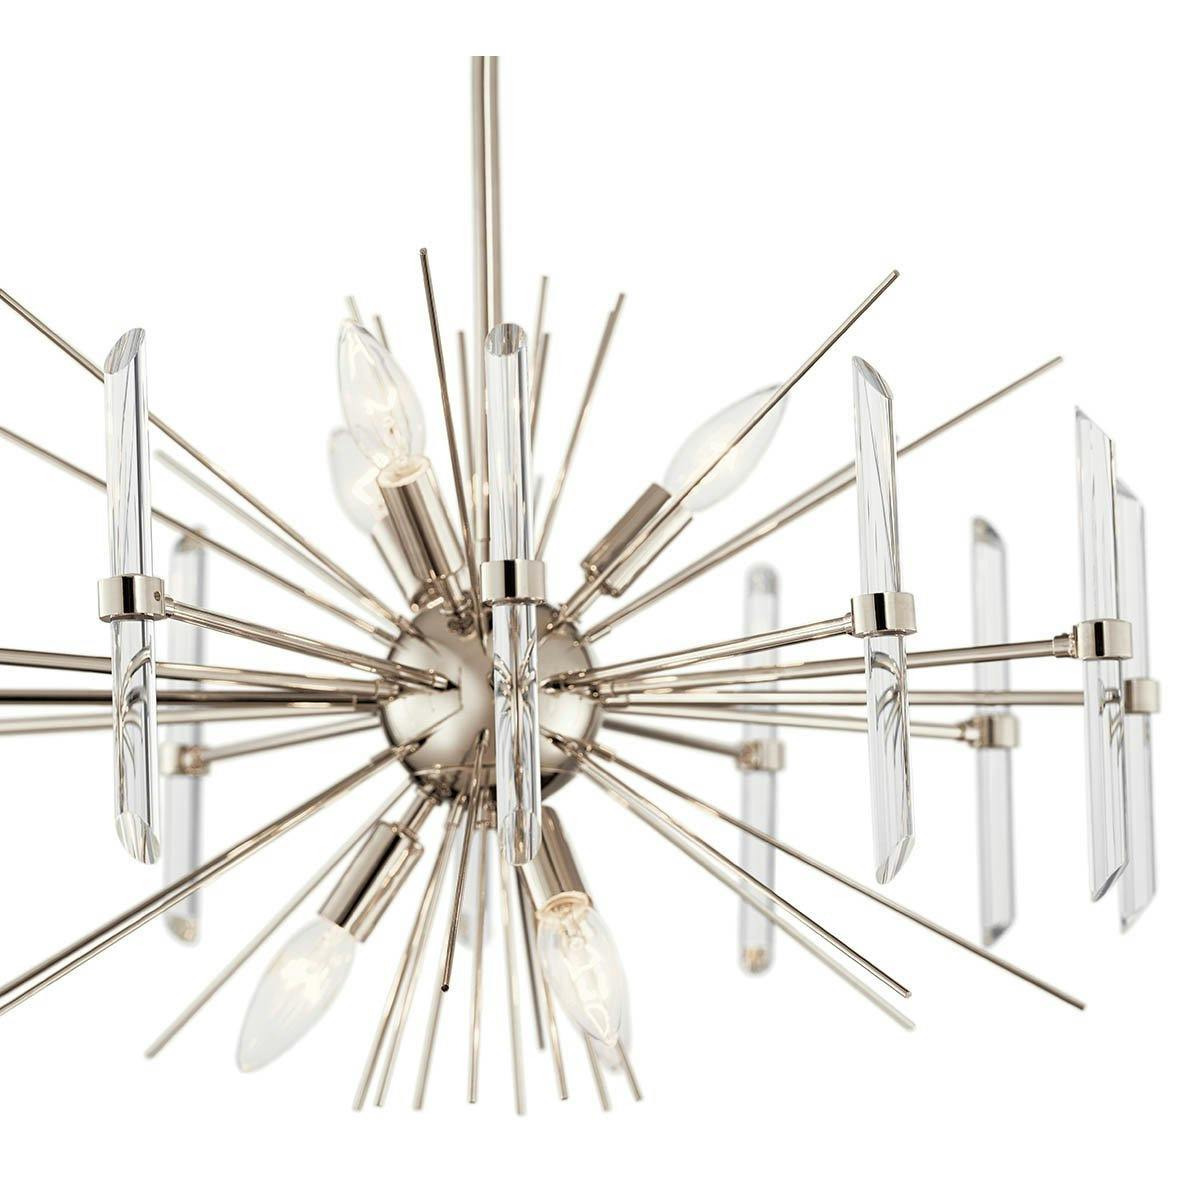 Close up view of the Eris 15.25" Chandelier Polished Nickel on a white background